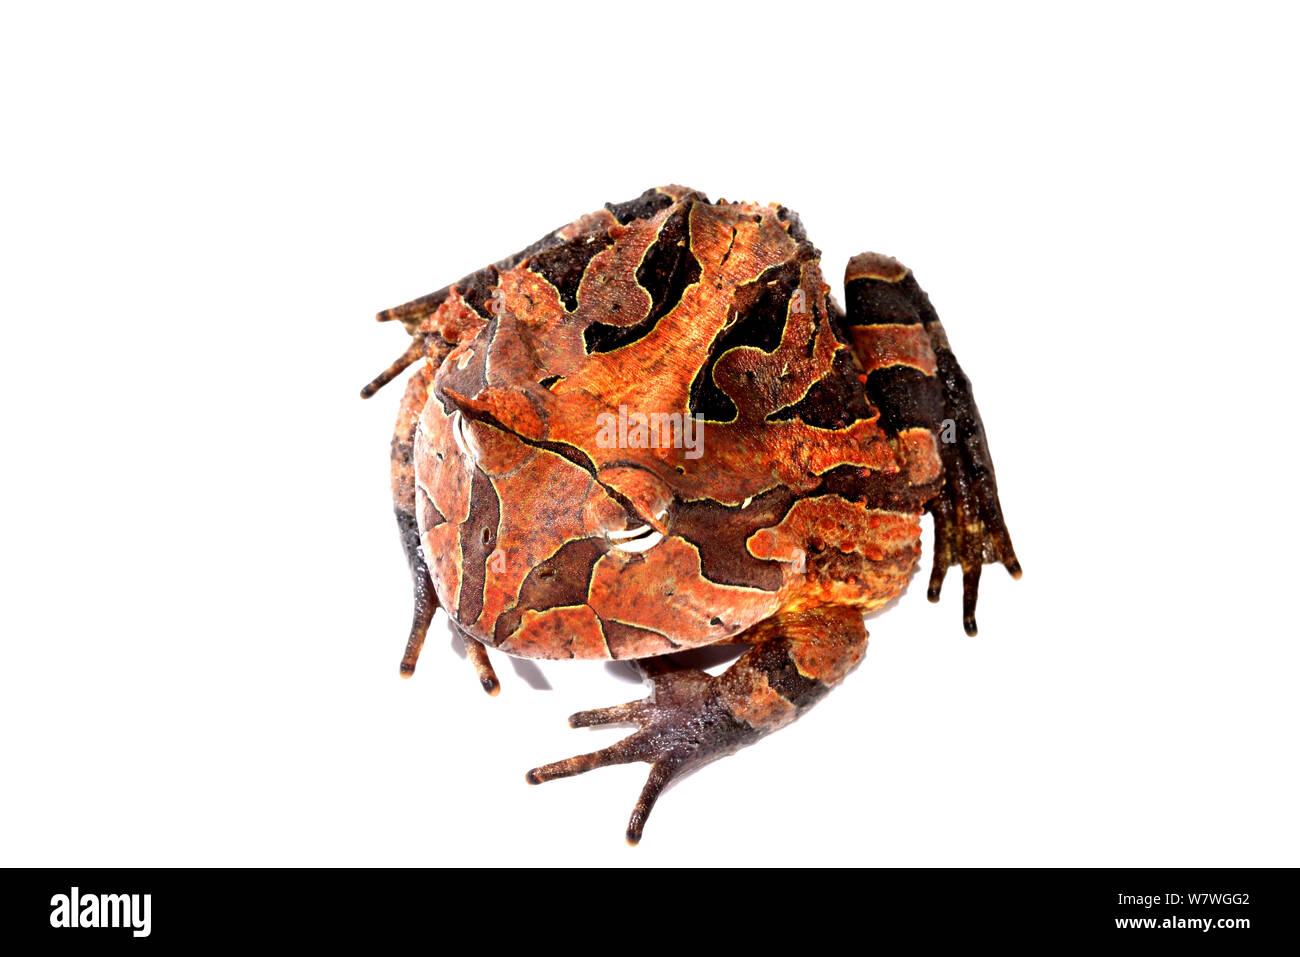 Amazonian horned frog (Ceratophrys cornuta) French Guiana. Taken in field studio with white background. Stock Photo